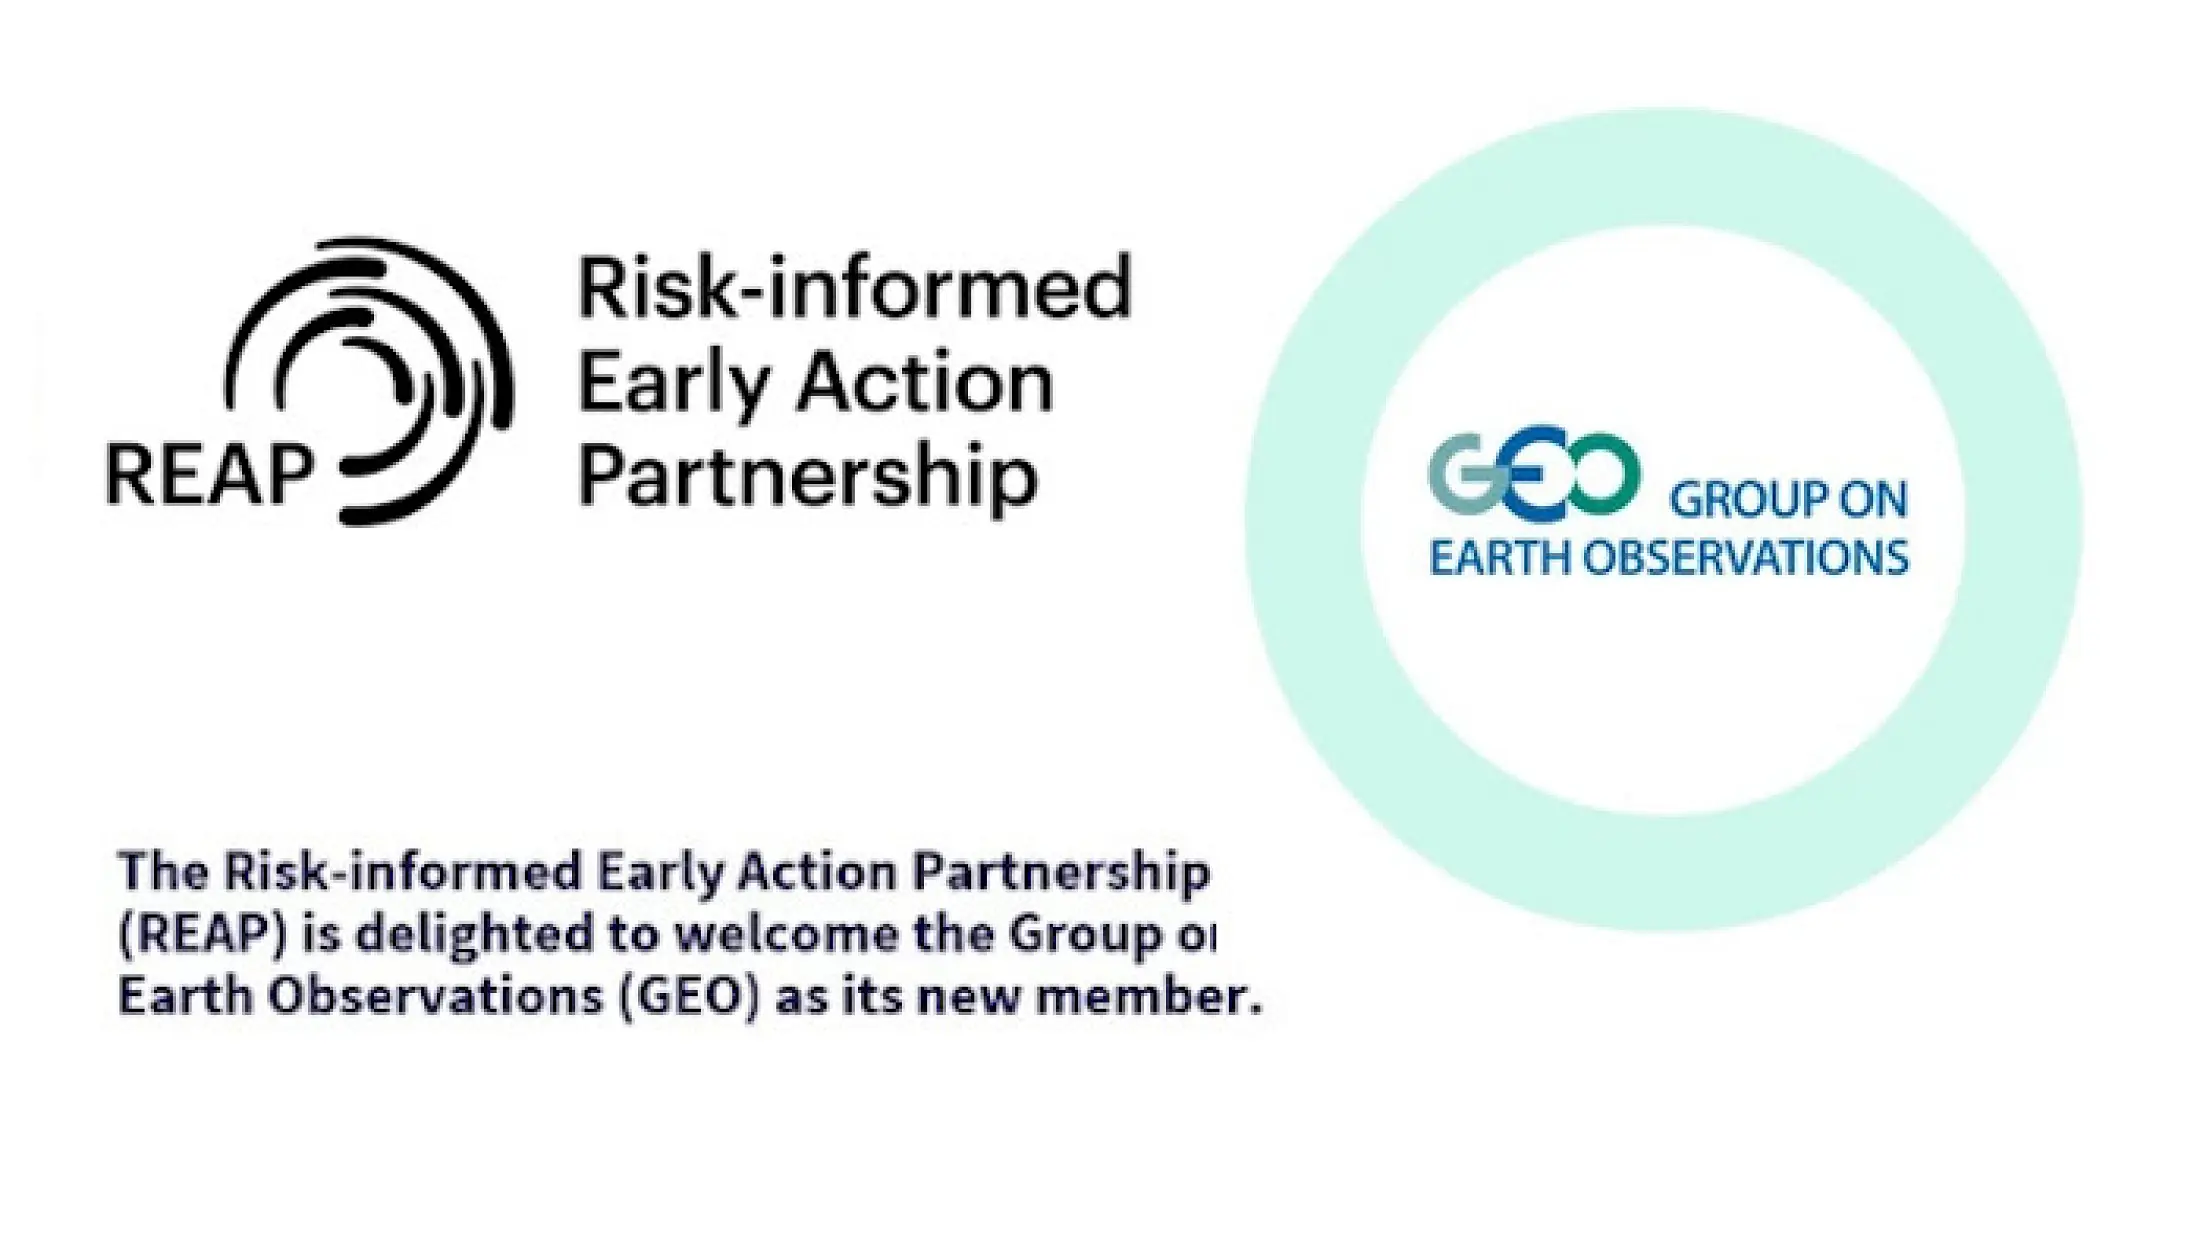 The Group on Earth Observations joins REAP